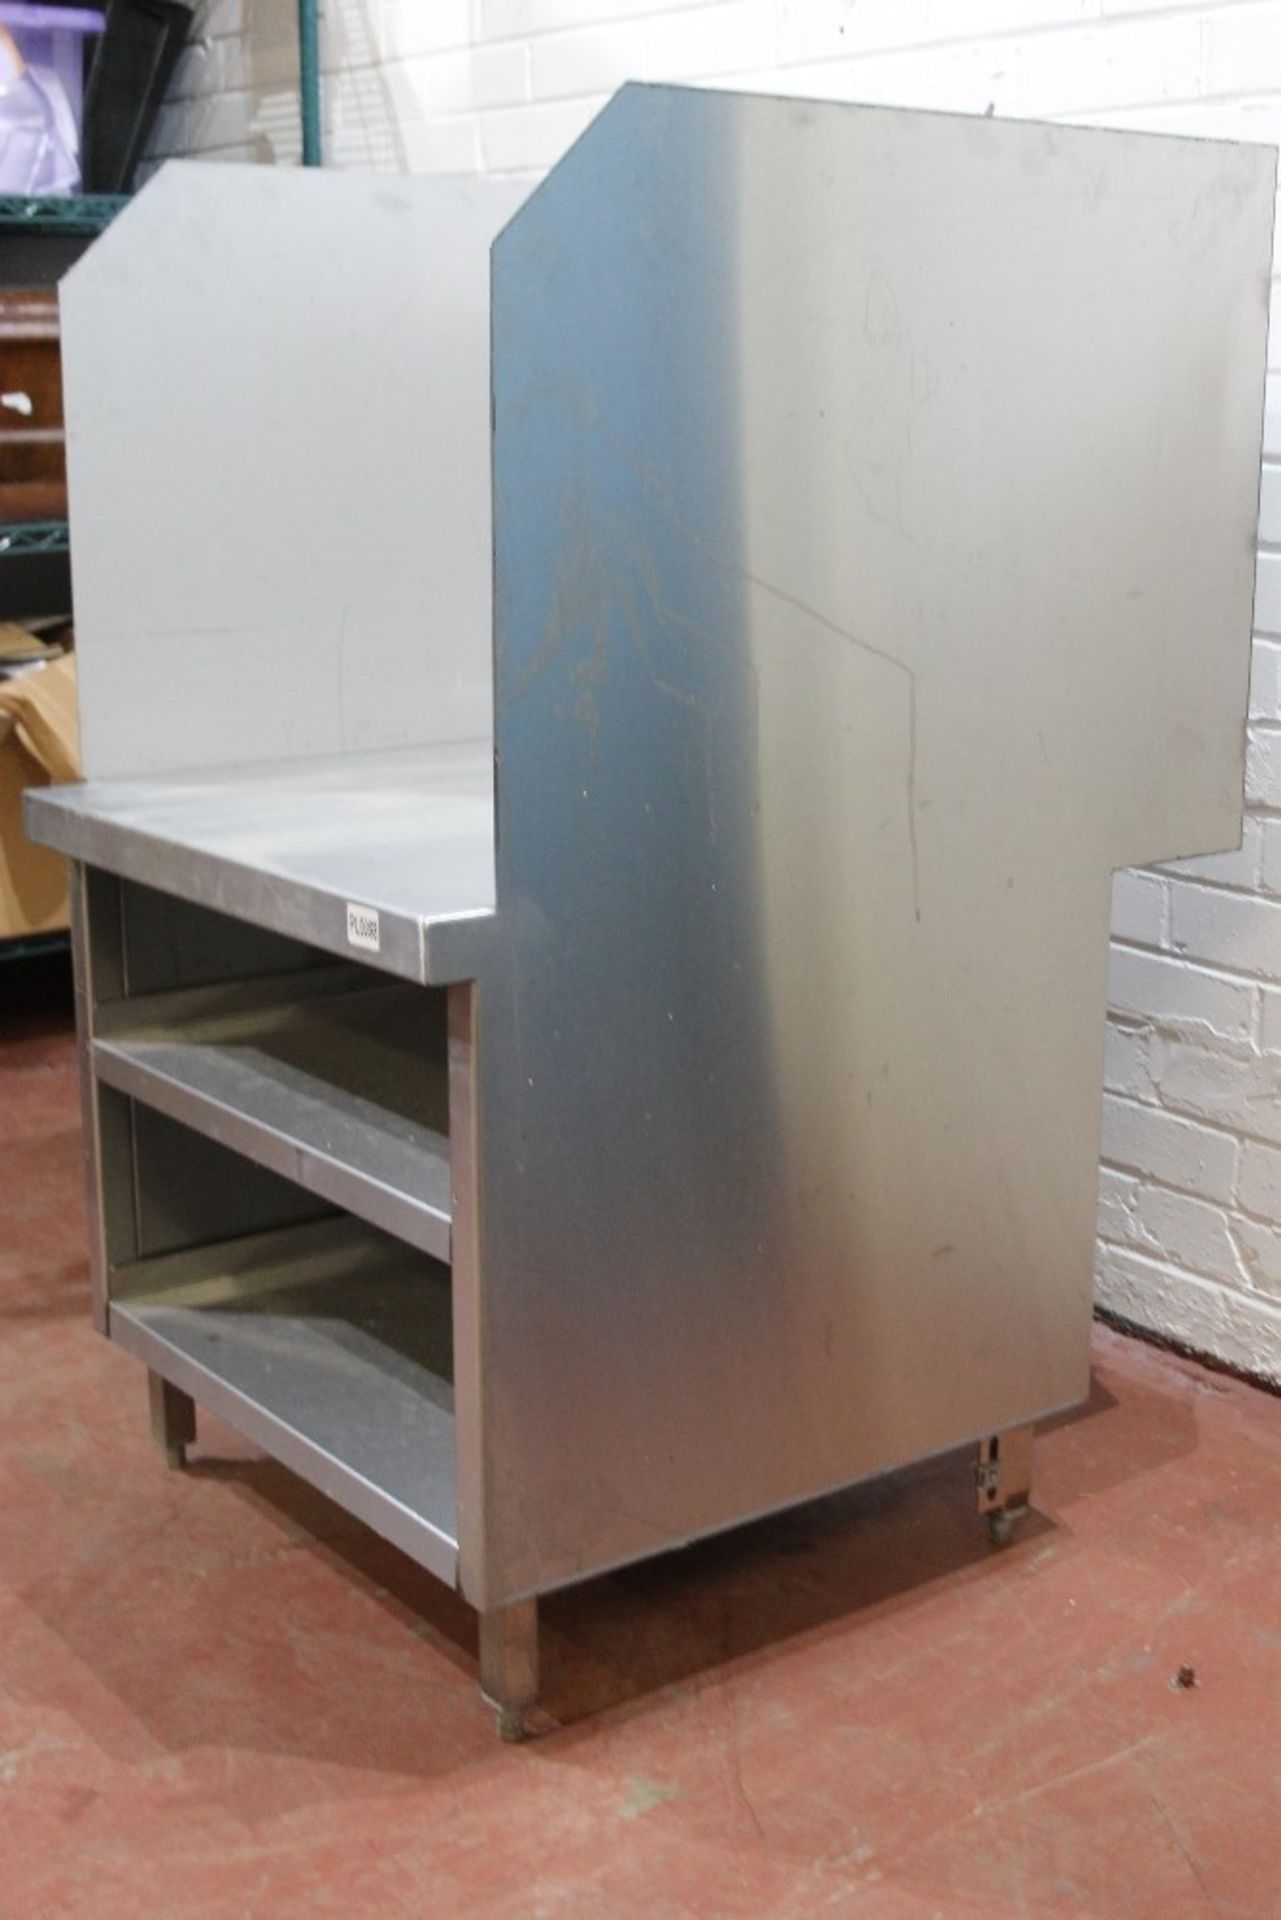 Stainless Steel Appliance Stand for Grill / Coffee Machine etc – 2 Shelves – W63cm x H110cm x - Image 2 of 3